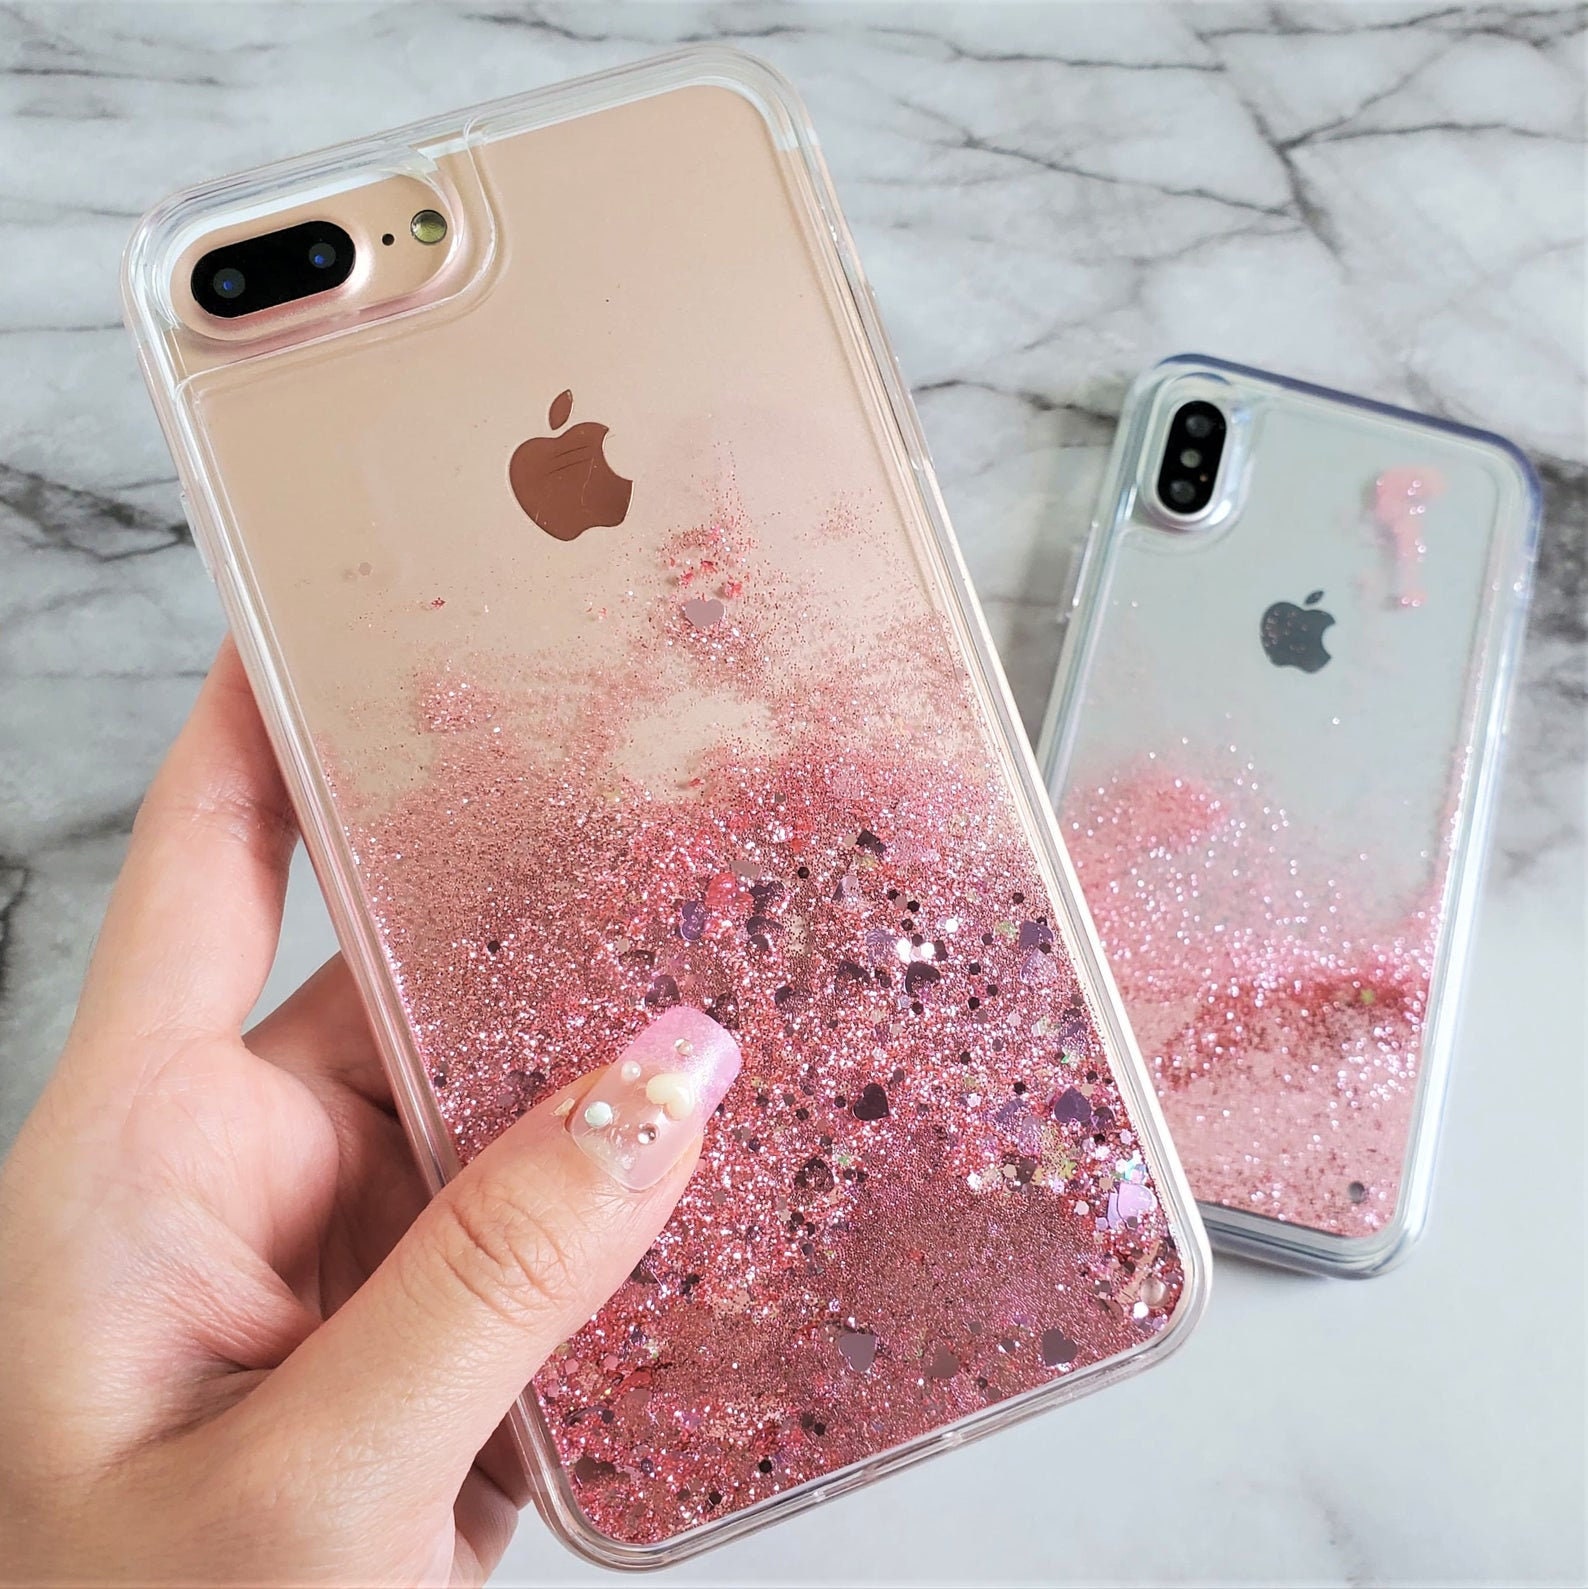 For Apple IPHONE 13 Mini Phone Case Liquid Glitter cover Protective Pink